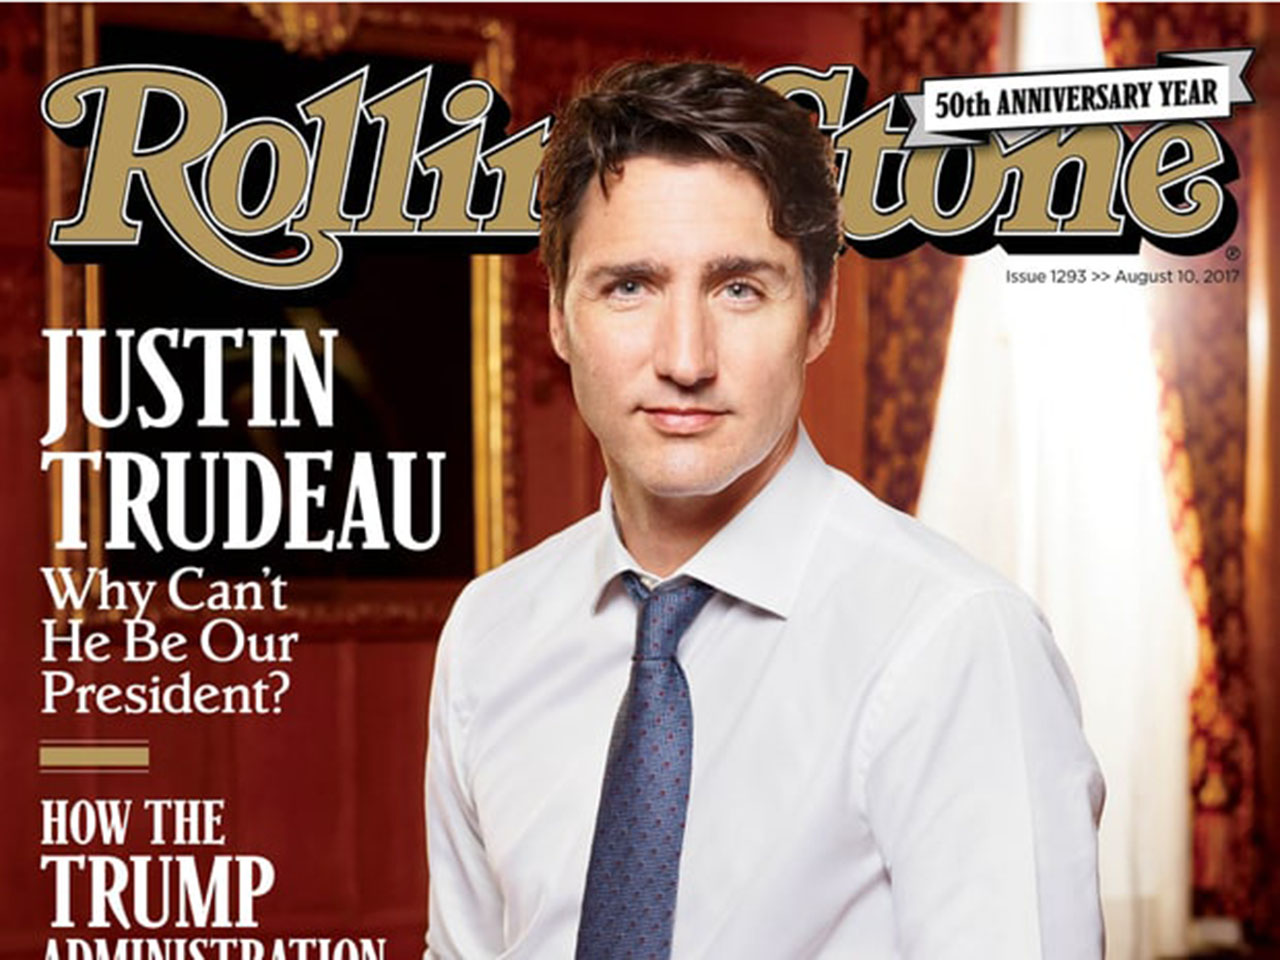 Prime Minister Justin Trudeau on the cover of The Rolling Stone. The prime minister was the subject of a glowing feature profile.